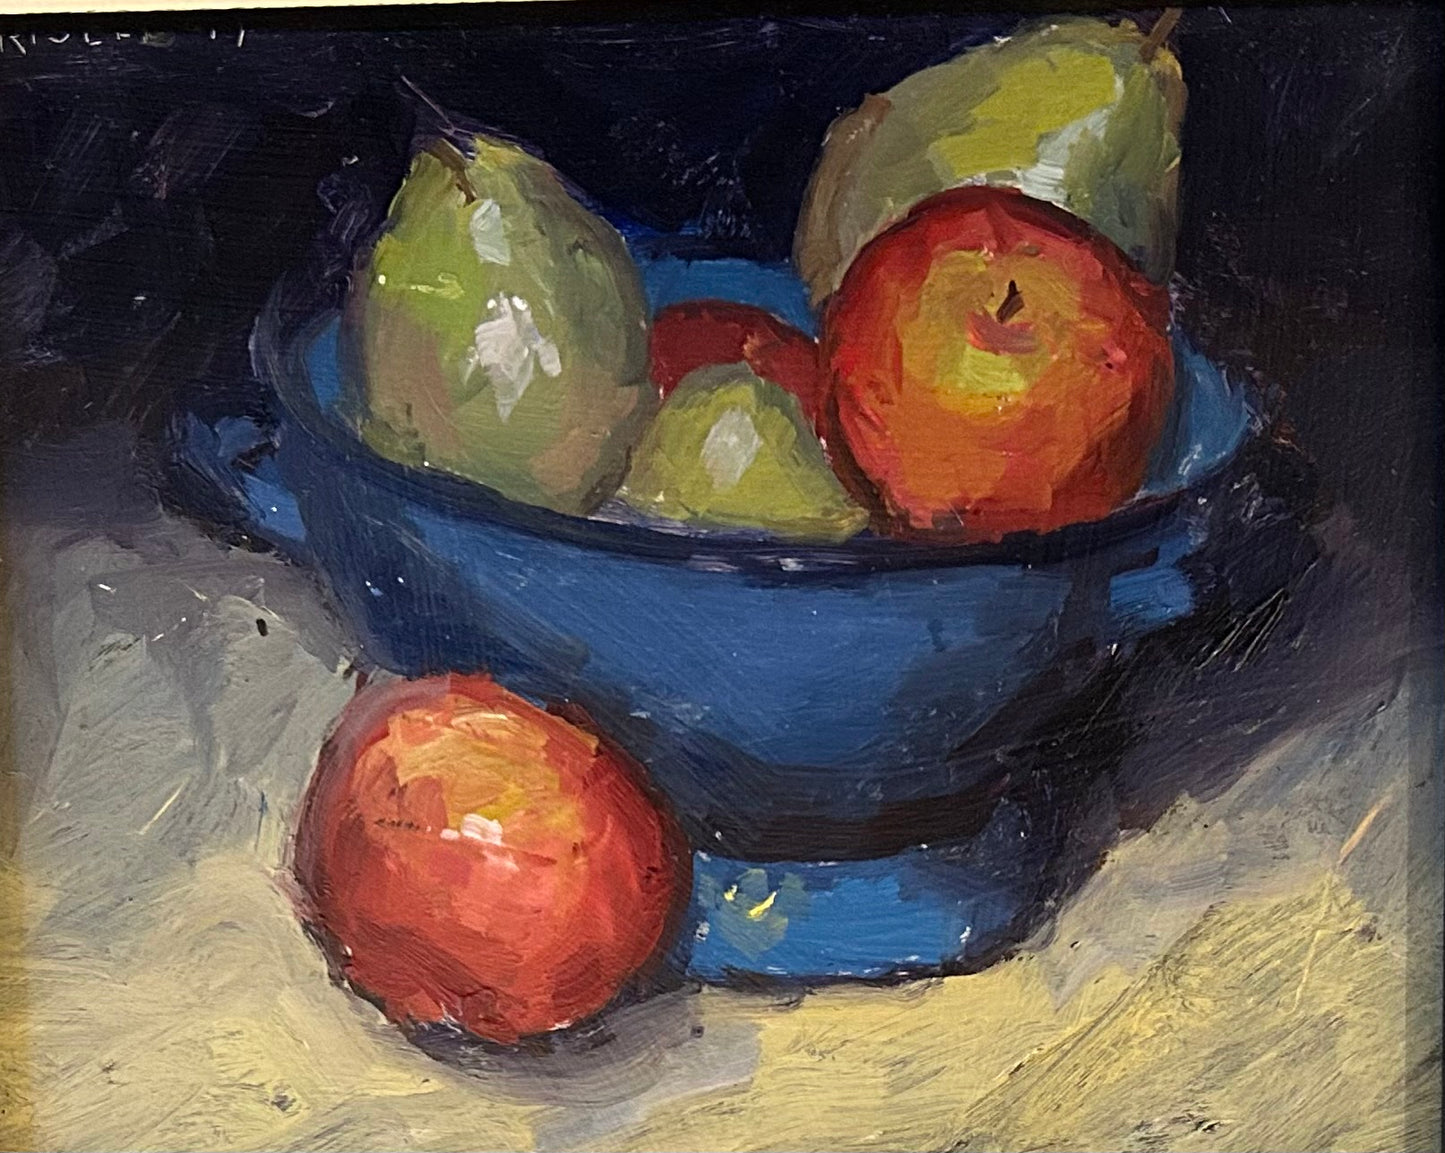 Blue Colander (8 Inches x 10 Inches)